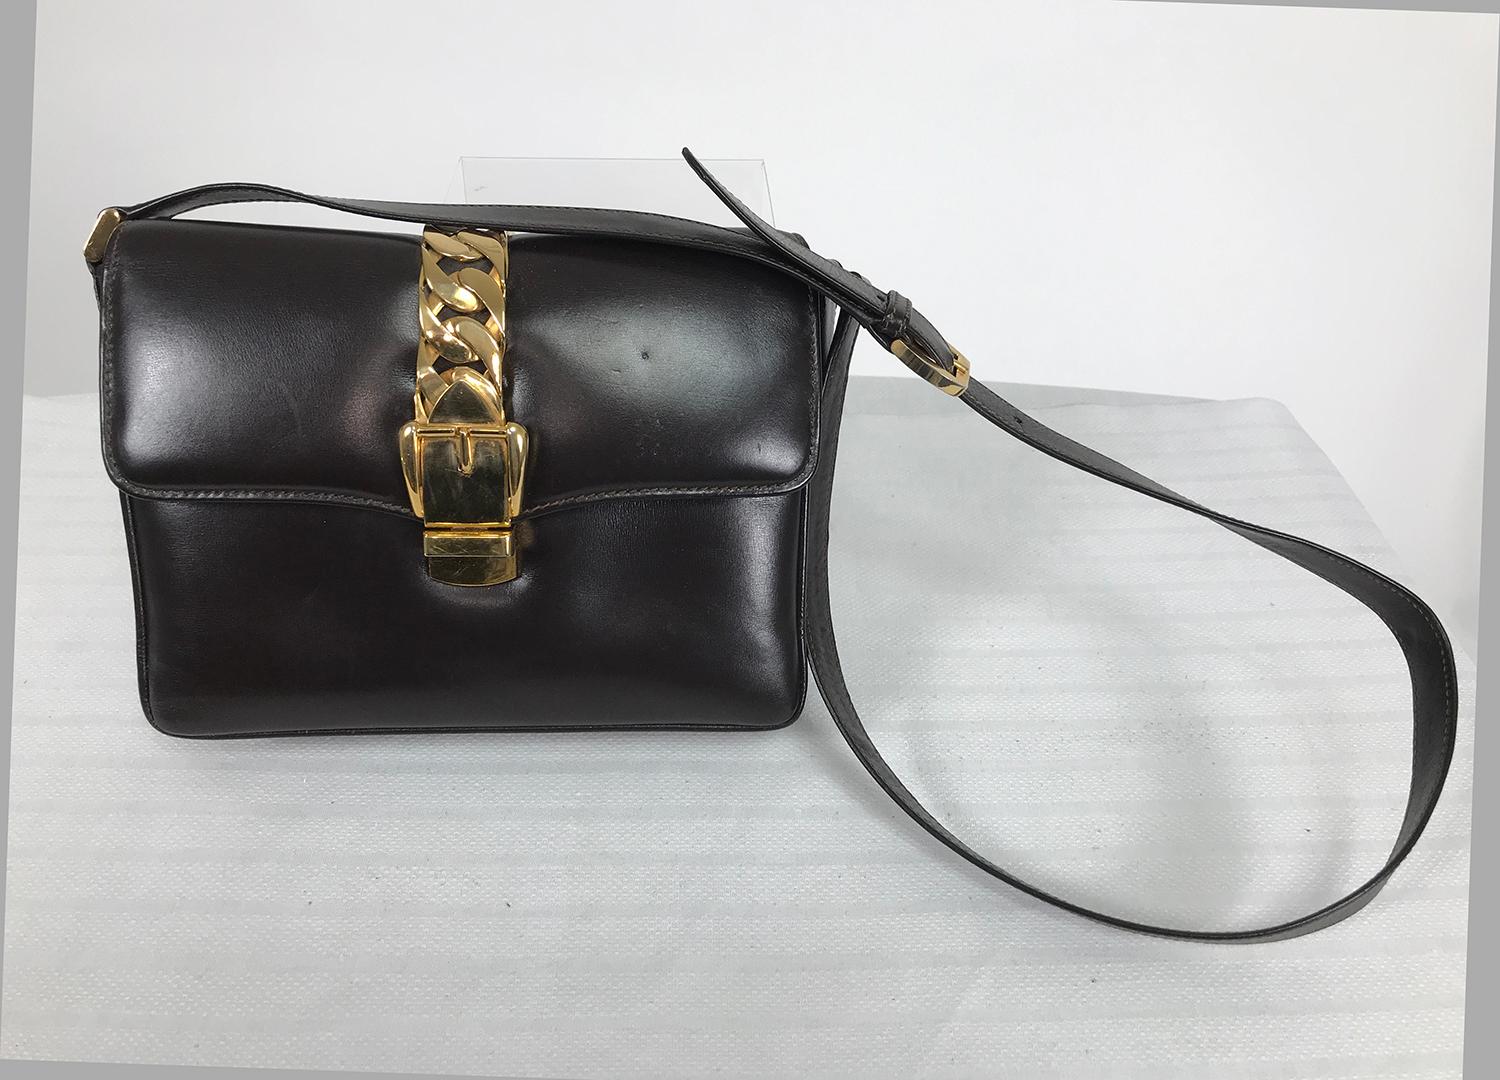 Gucci original Sylvie shoulder bag from 1969, in chocolate brown leather with gold hardware. The archival inspiration for Gucci's 2019 Sylvie 1969 handbag. This bag is in remarkably good condition for it's age, the smooth leather has a beautiful